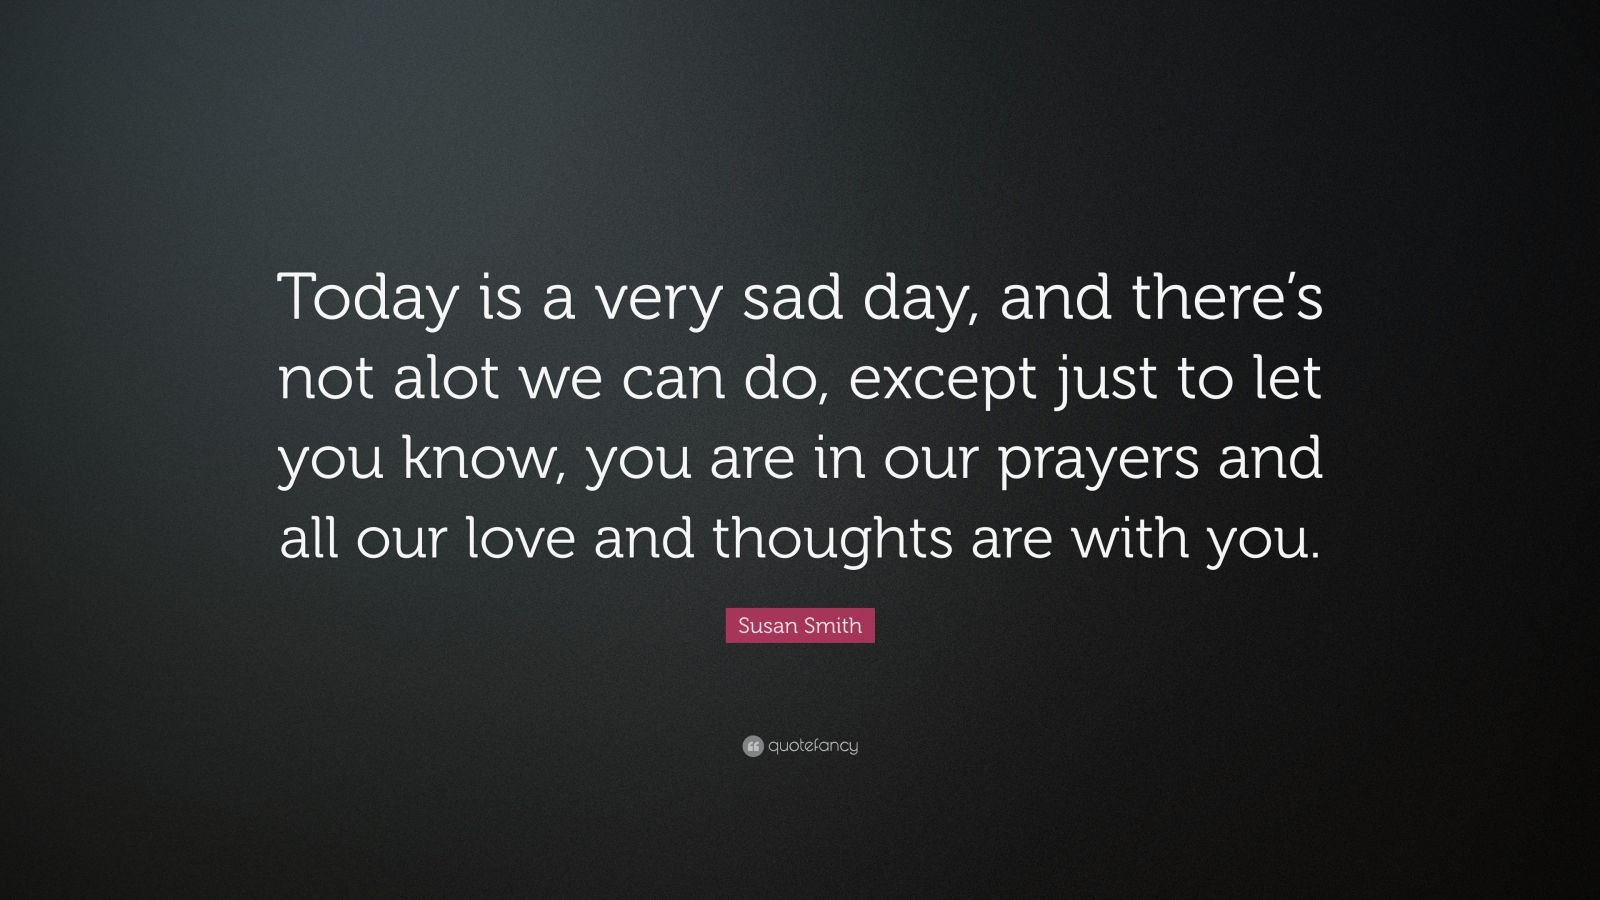 Sad Day Quotes
 Susan Smith Quote “Today is a very sad day and there’s